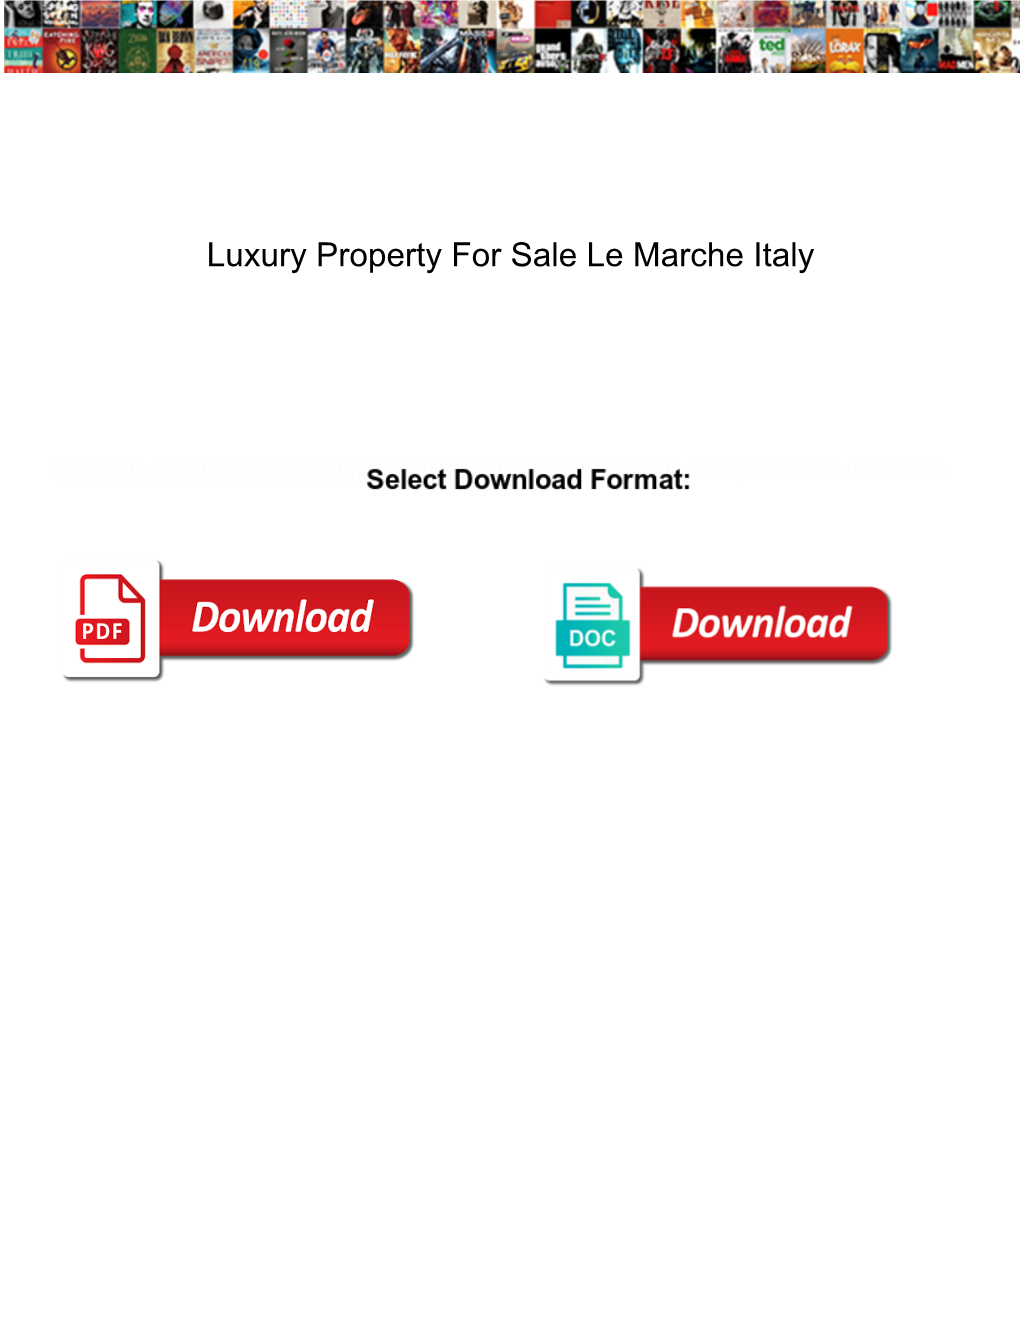 Luxury Property for Sale Le Marche Italy